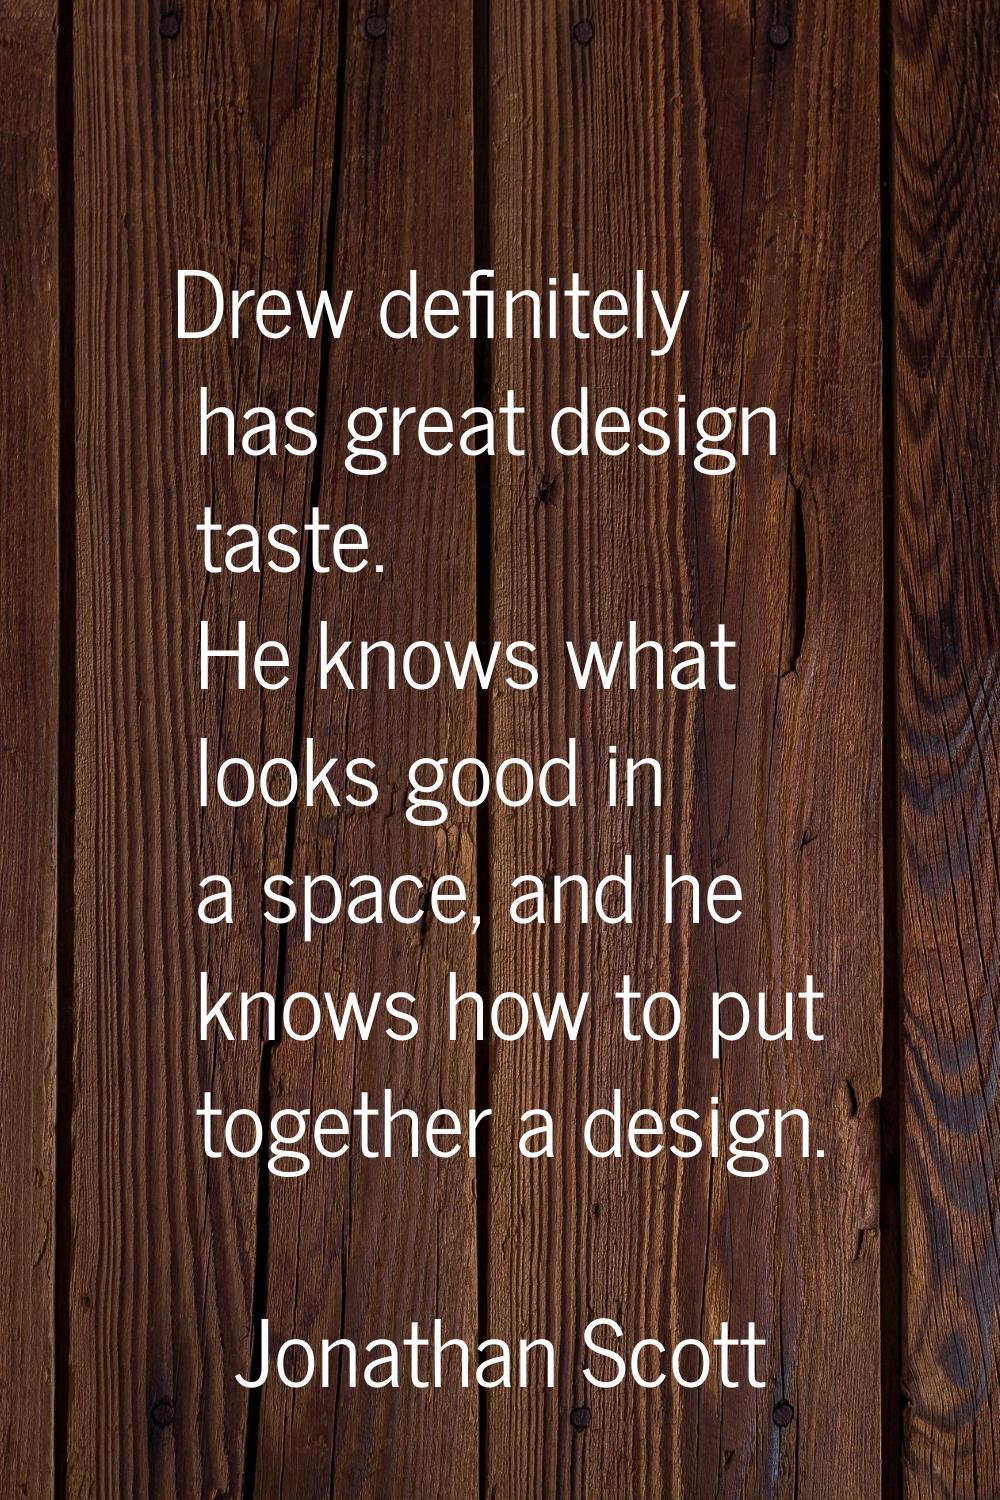 Drew definitely has great design taste. He knows what looks good in a space, and he knows how to pu